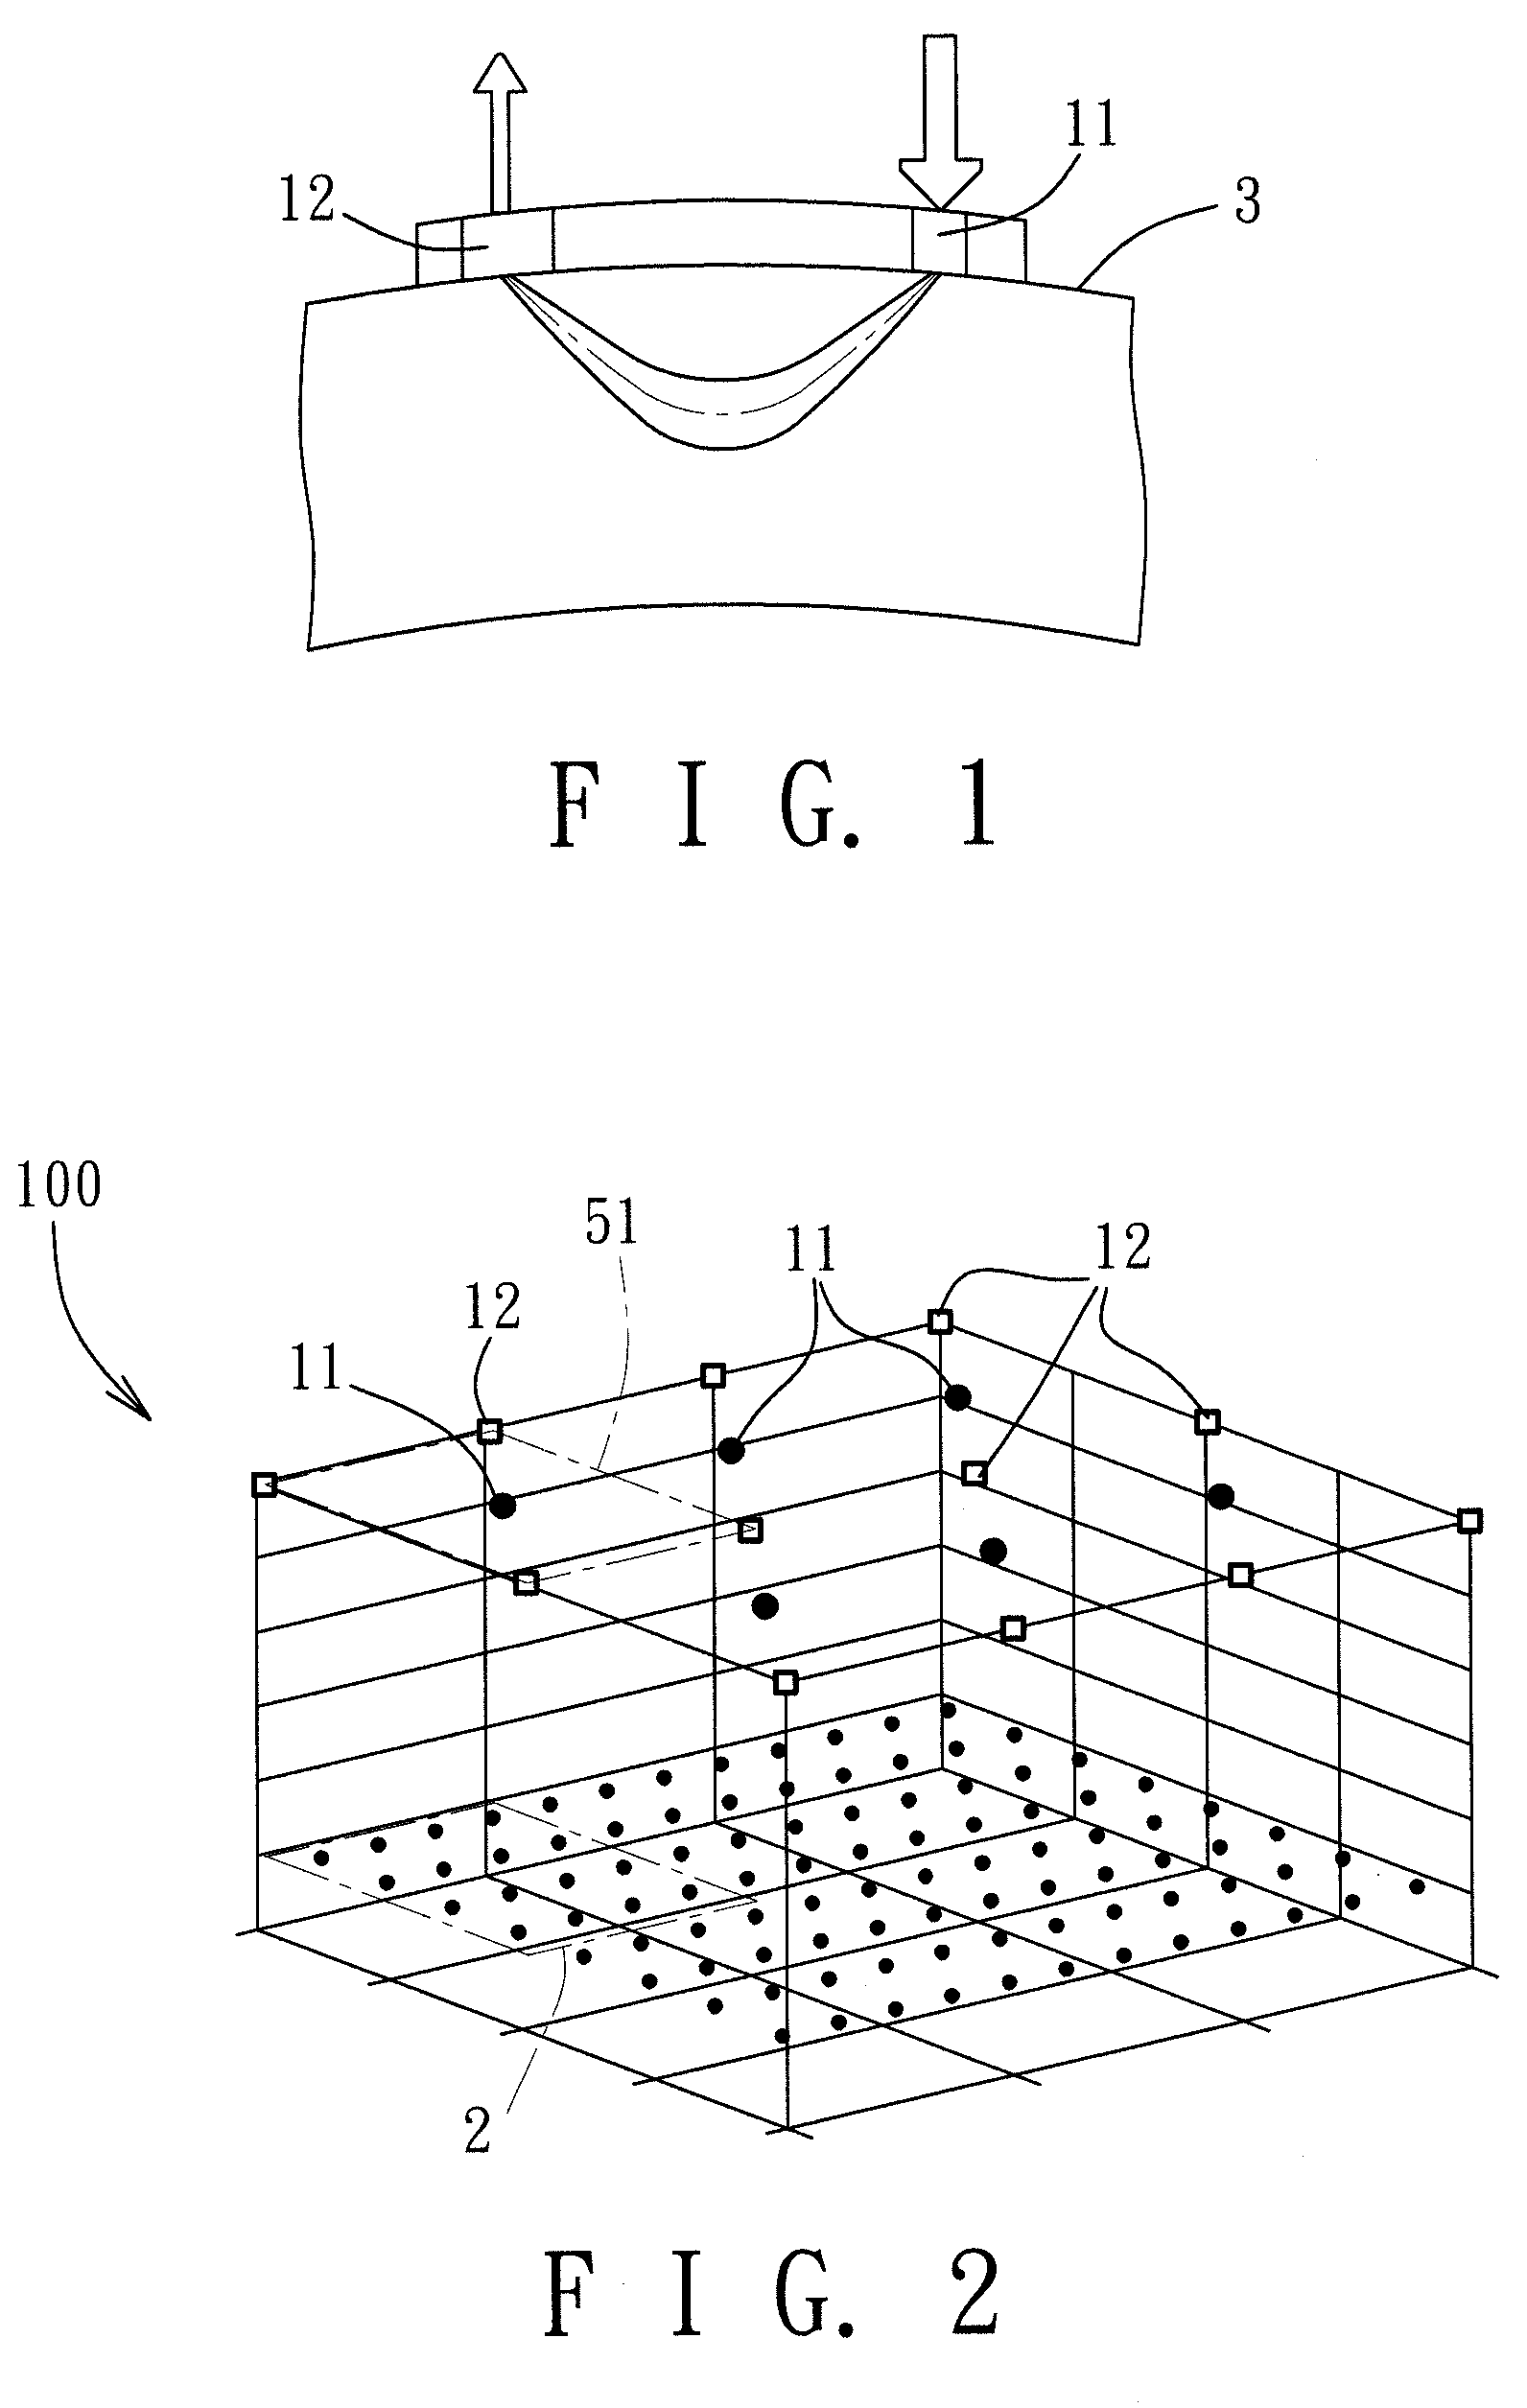 Image reconstruction method for diffuse optical tomography, diffuse optical tomography system, and computer program product